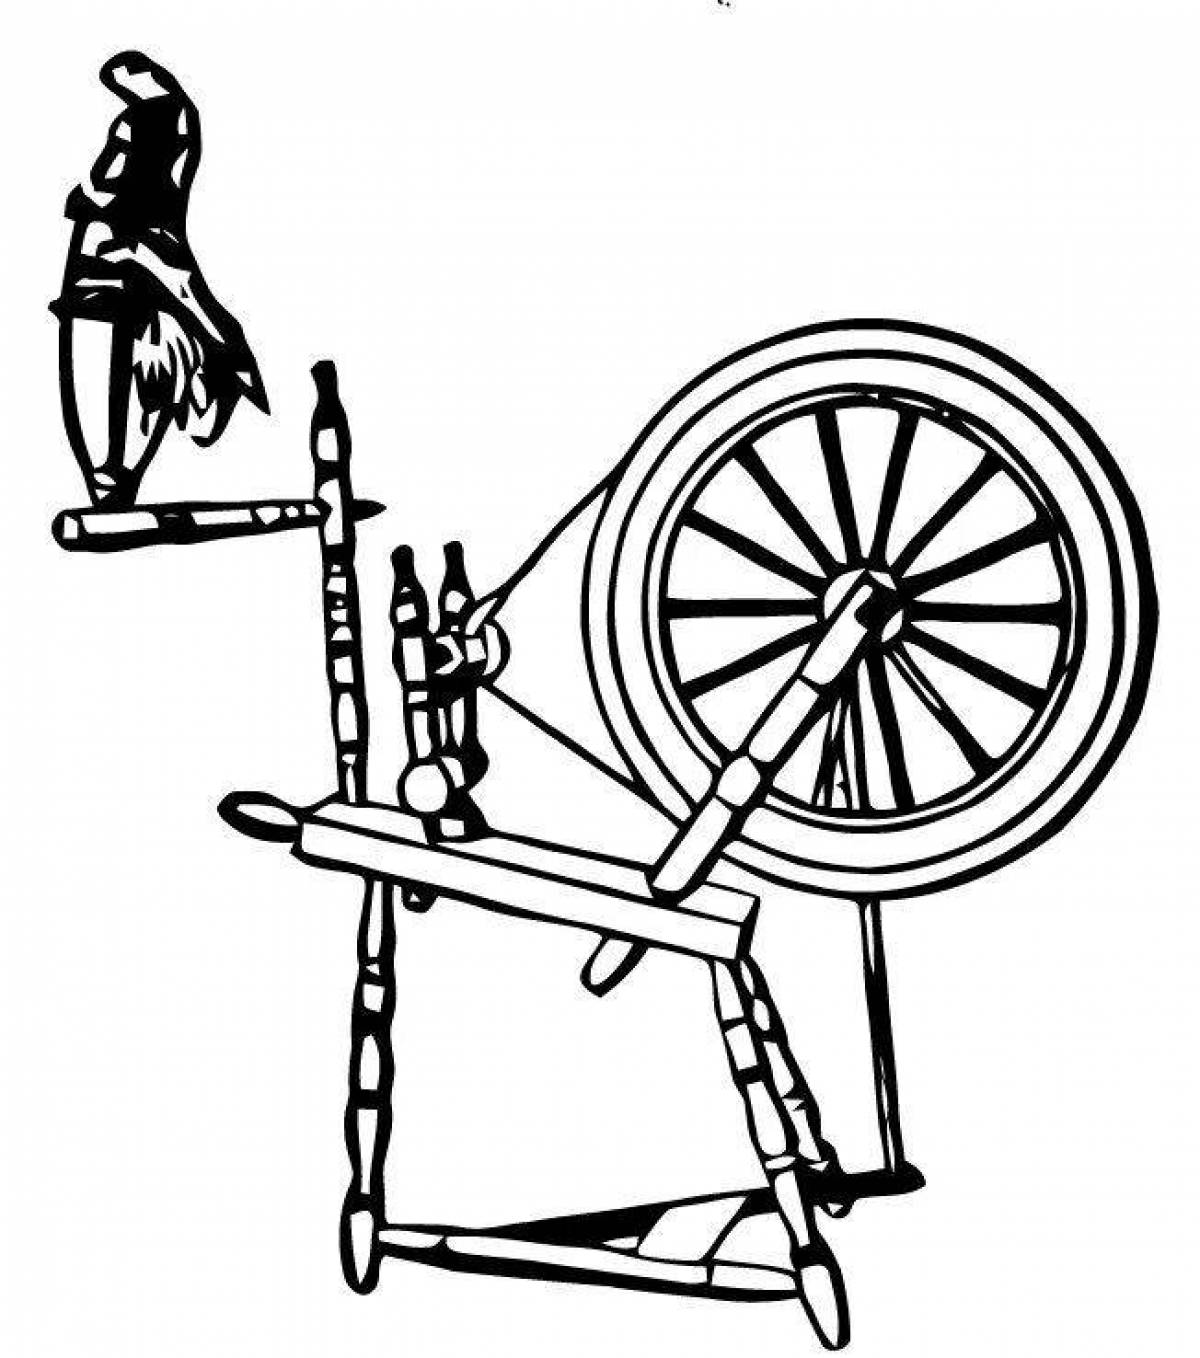 Amazing spinning wheel coloring page